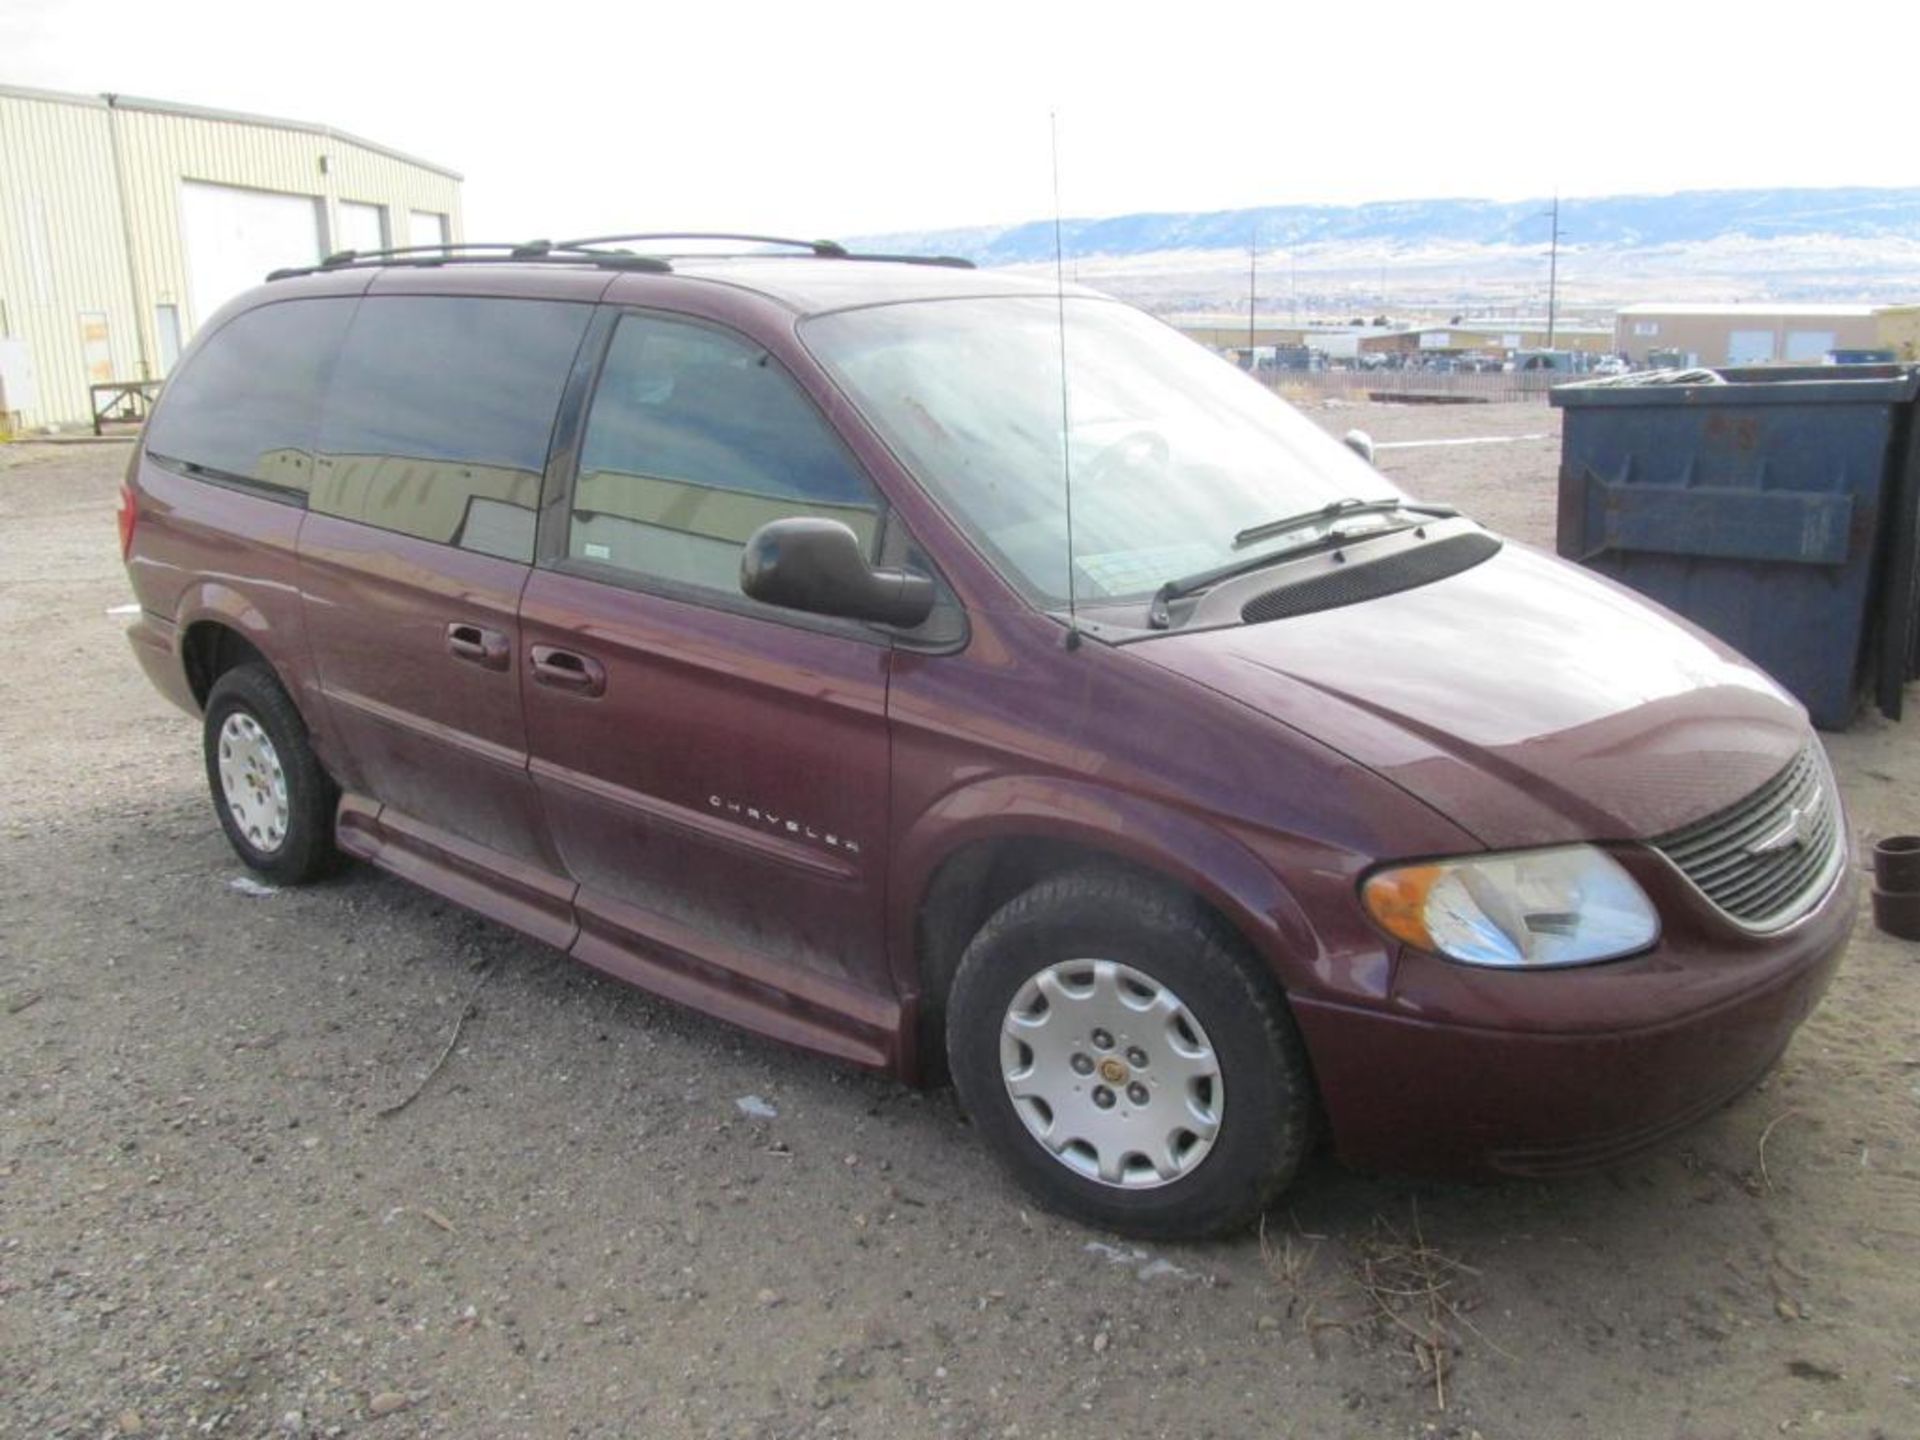 Chrysler Town & Country LX Full Mobility Kneeling Mini Van, VIN: 2C4GD44311R390145 (New 2001), with - Image 2 of 6